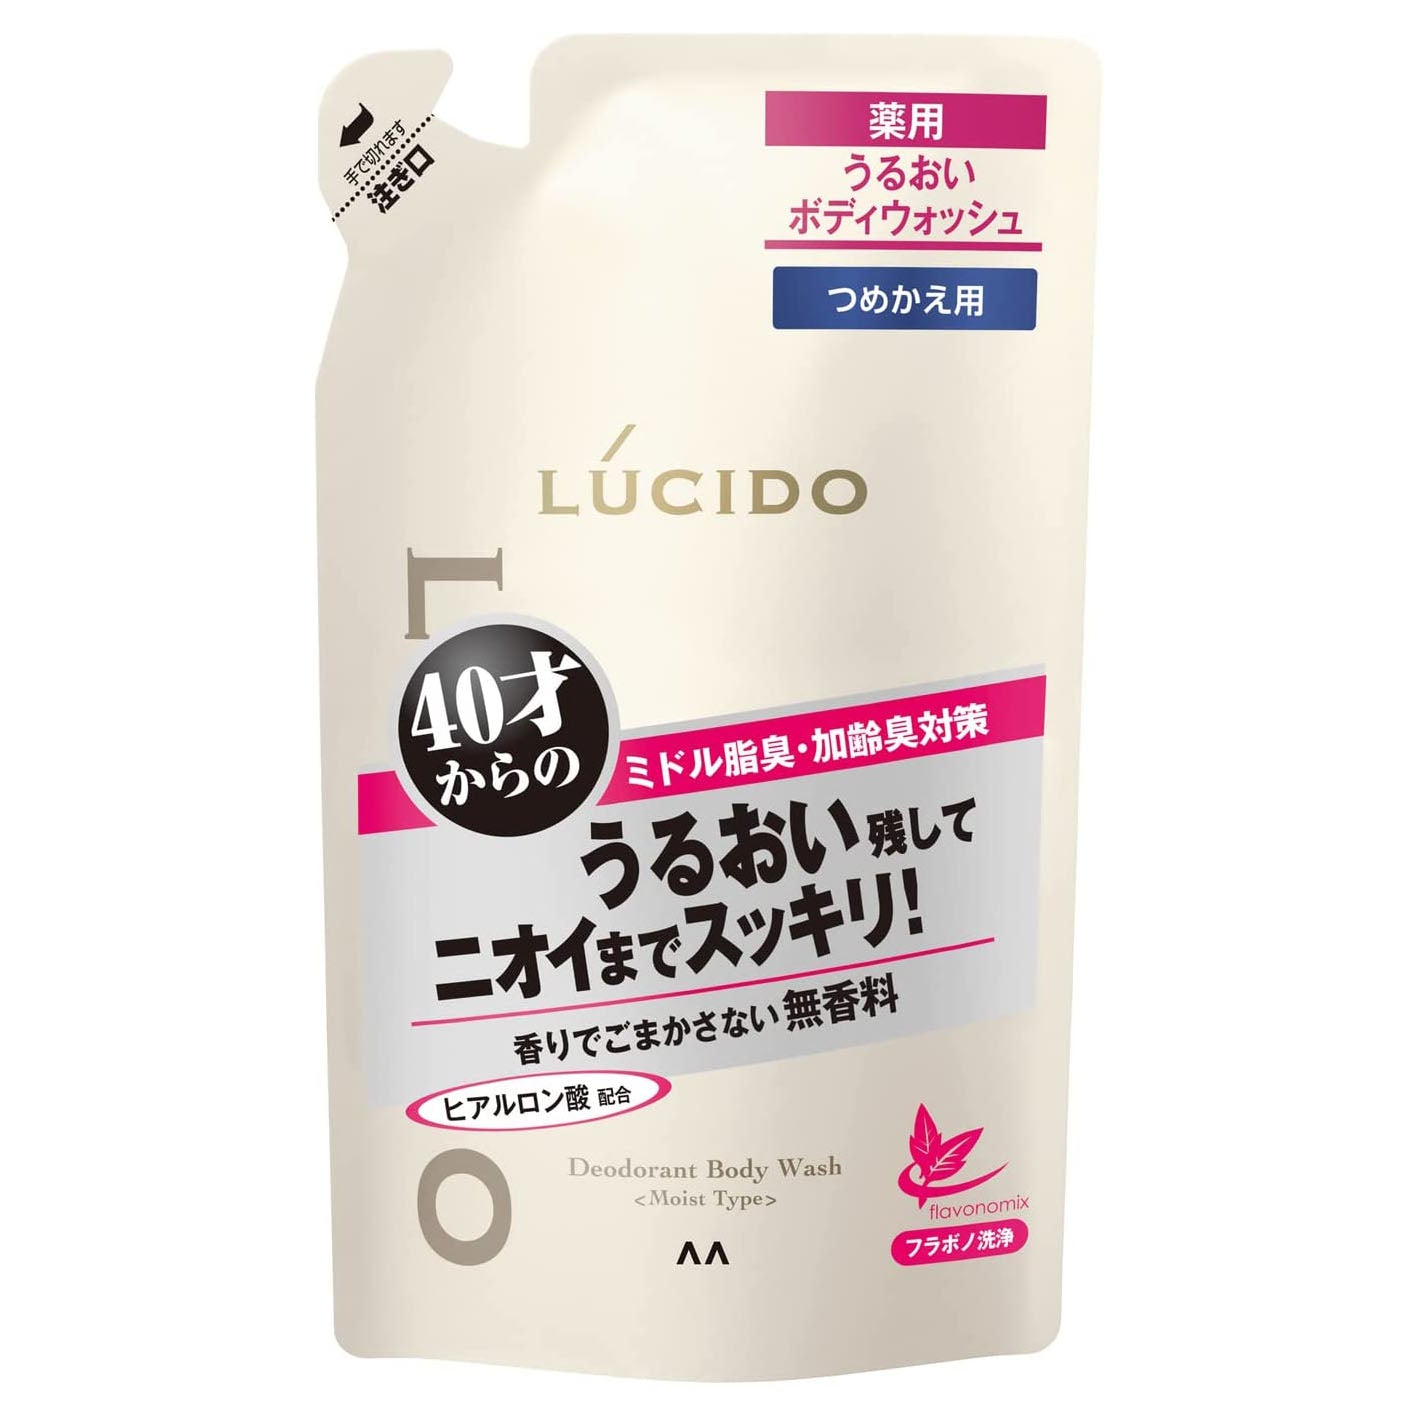 Lucido Medicated deodorant Moisturizing Body Wash 380ml - Refill - Harajuku Culture Japan - Japanease Products Store Beauty and Stationery